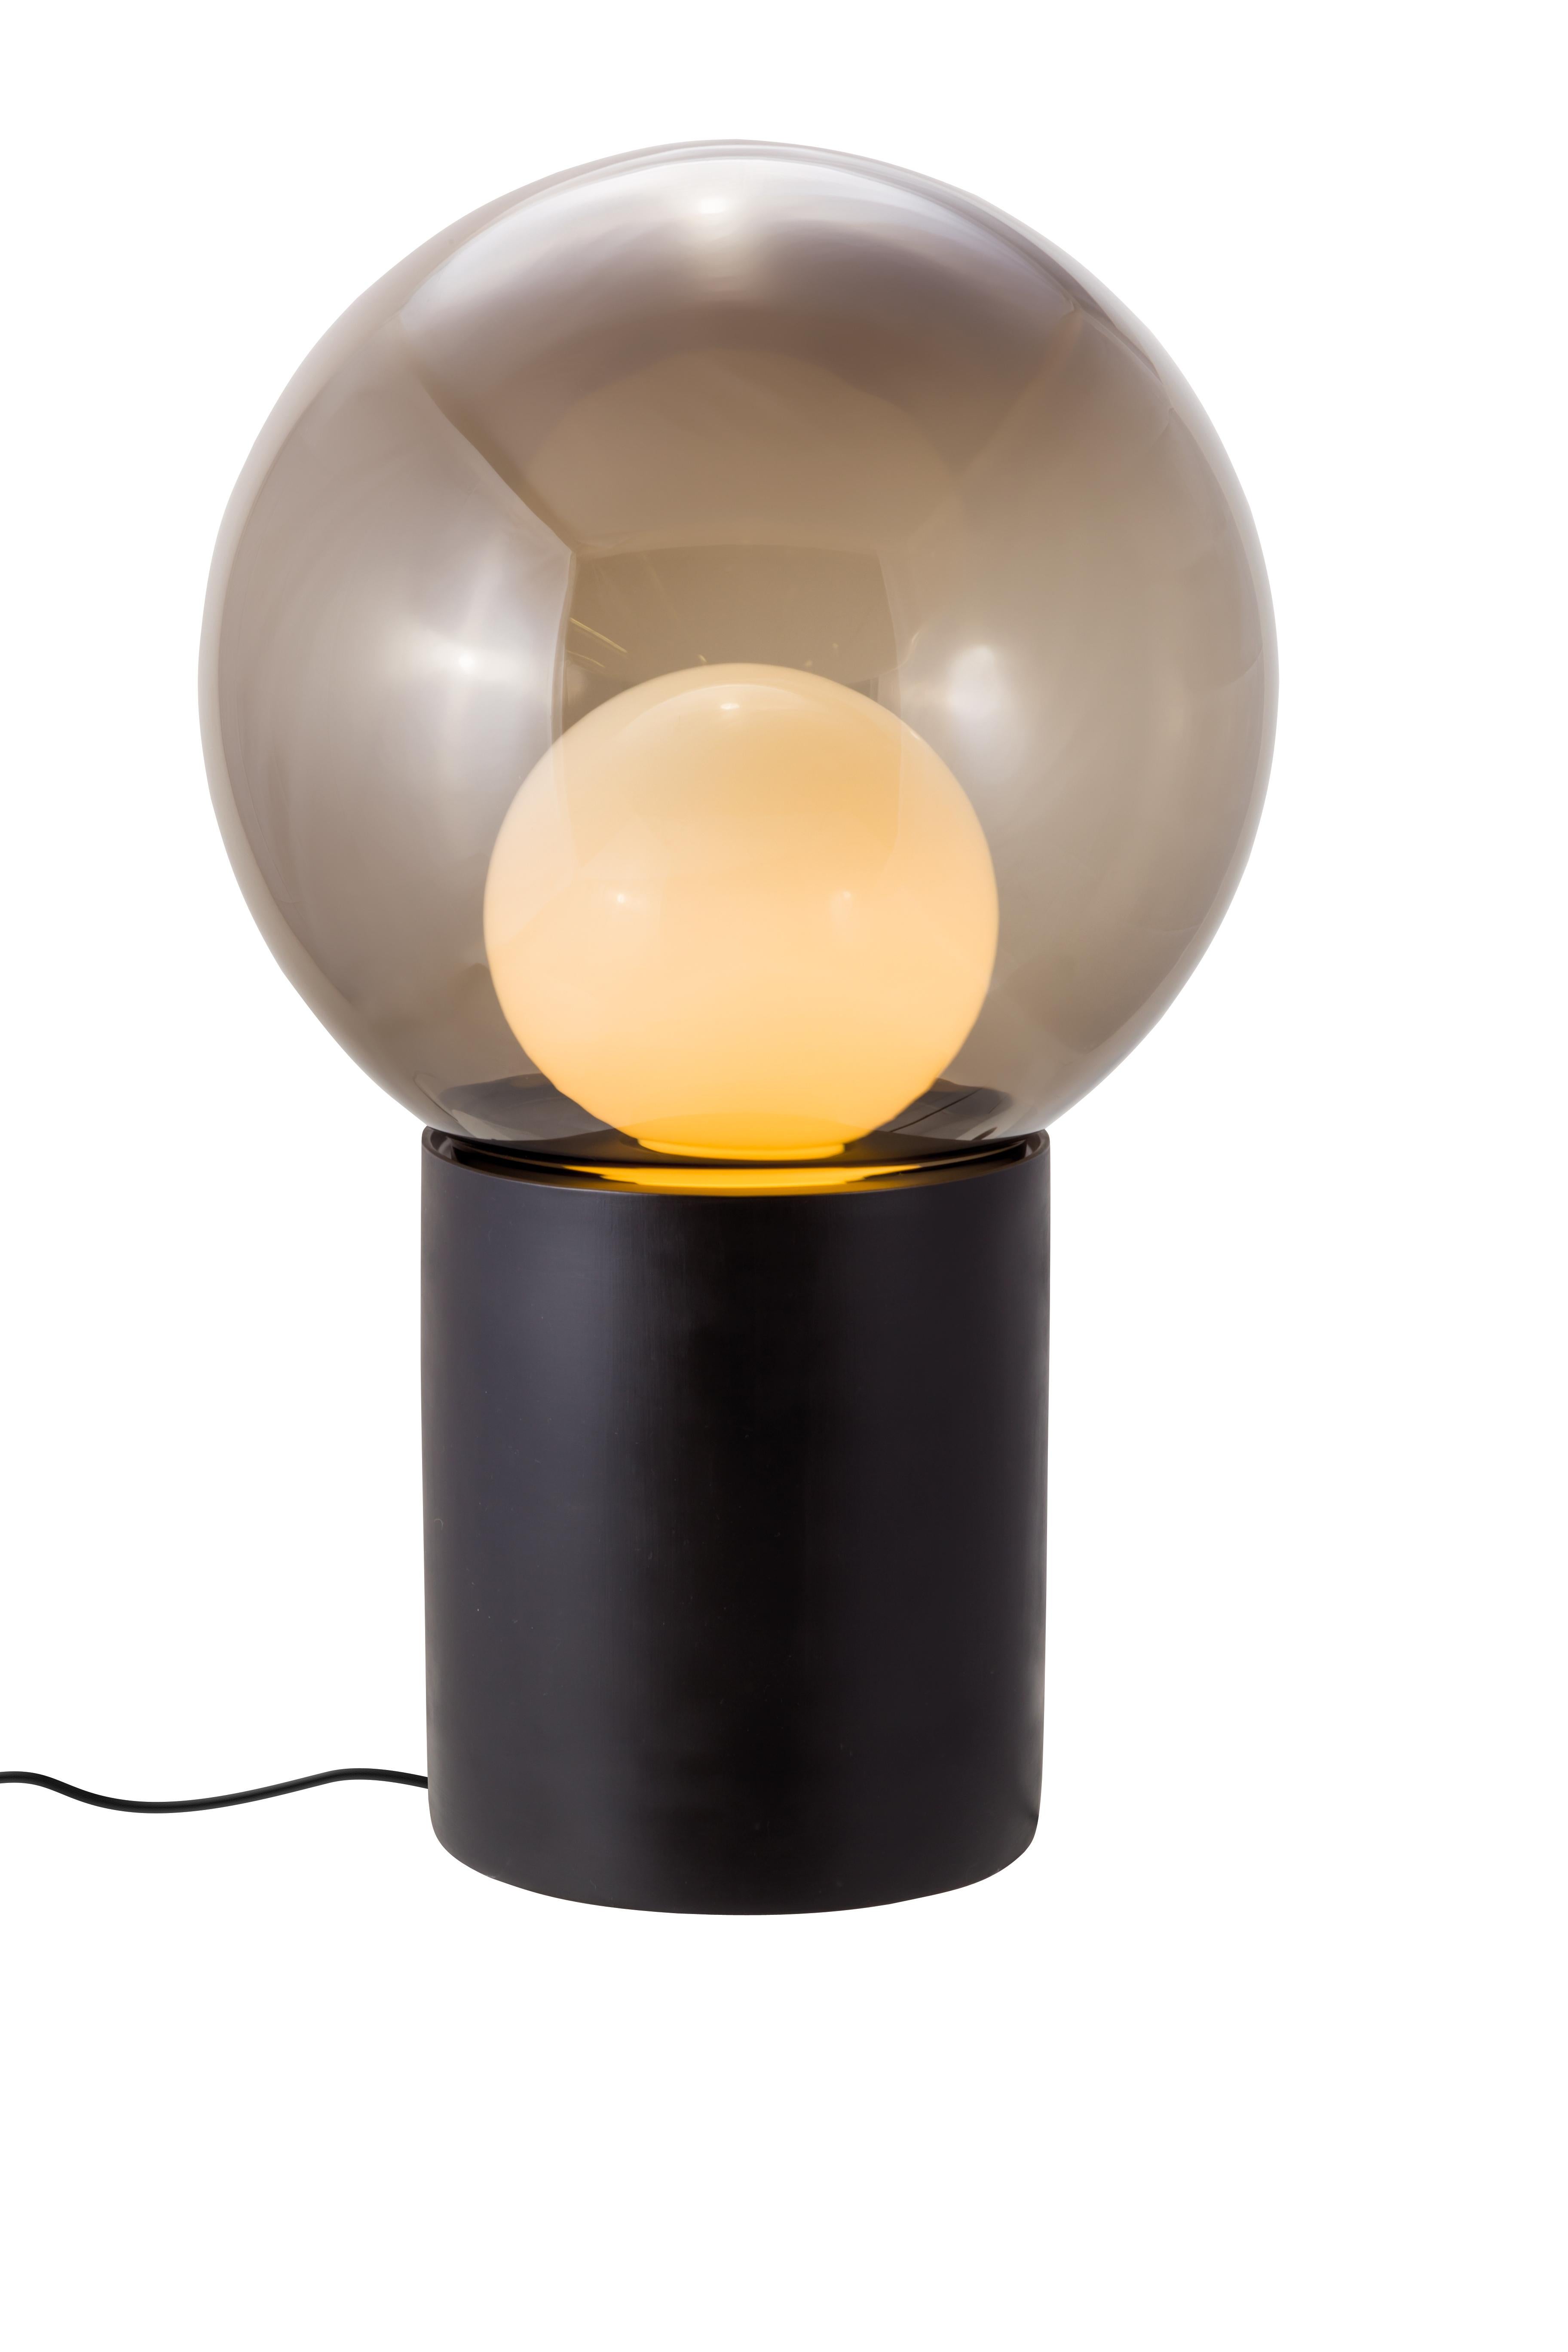 Boule high smoky grey opal white black floor lamp by Pulpo
Dimensions: D52 x H82.5cm
Materials: ceramic, handblown glass, coloured, textile.

Also available in different finishes: transparent opal white black, transparent smoky grey black, smoky